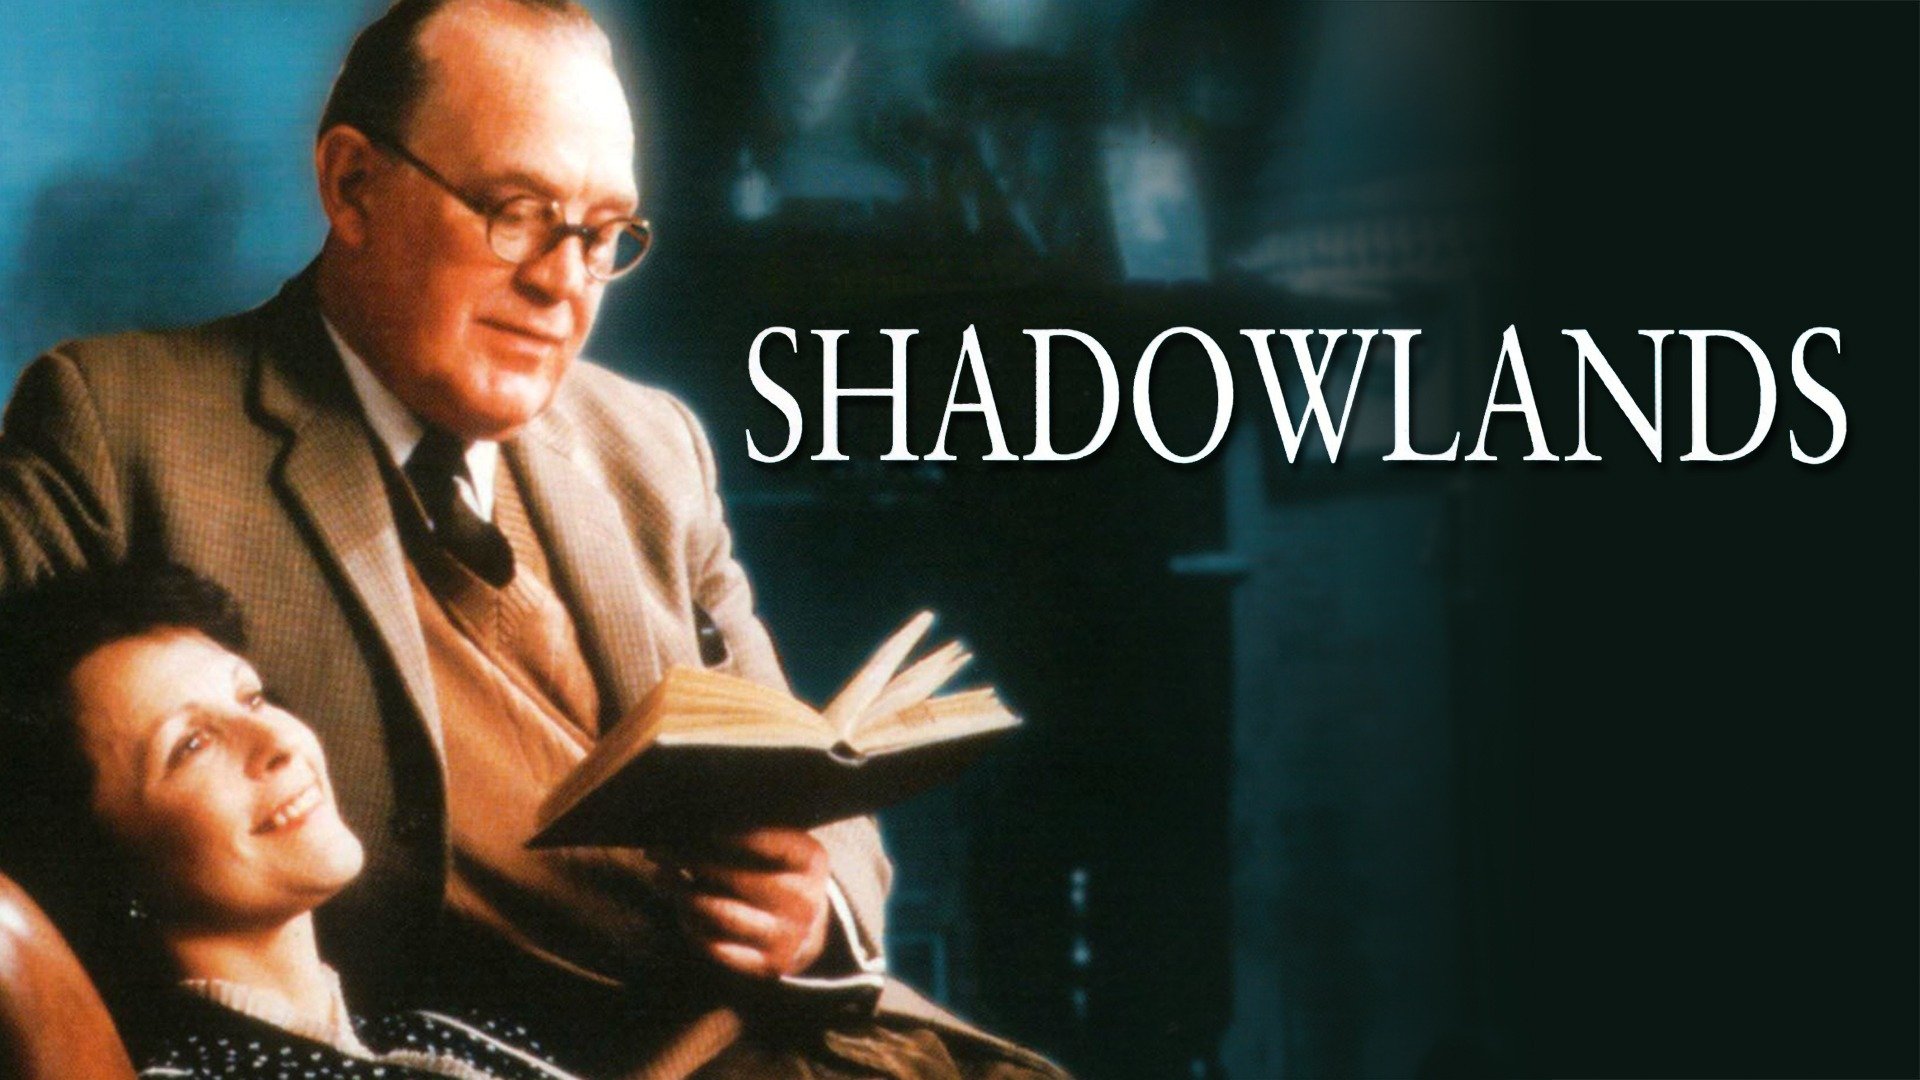 41-facts-about-the-movie-shadowlands